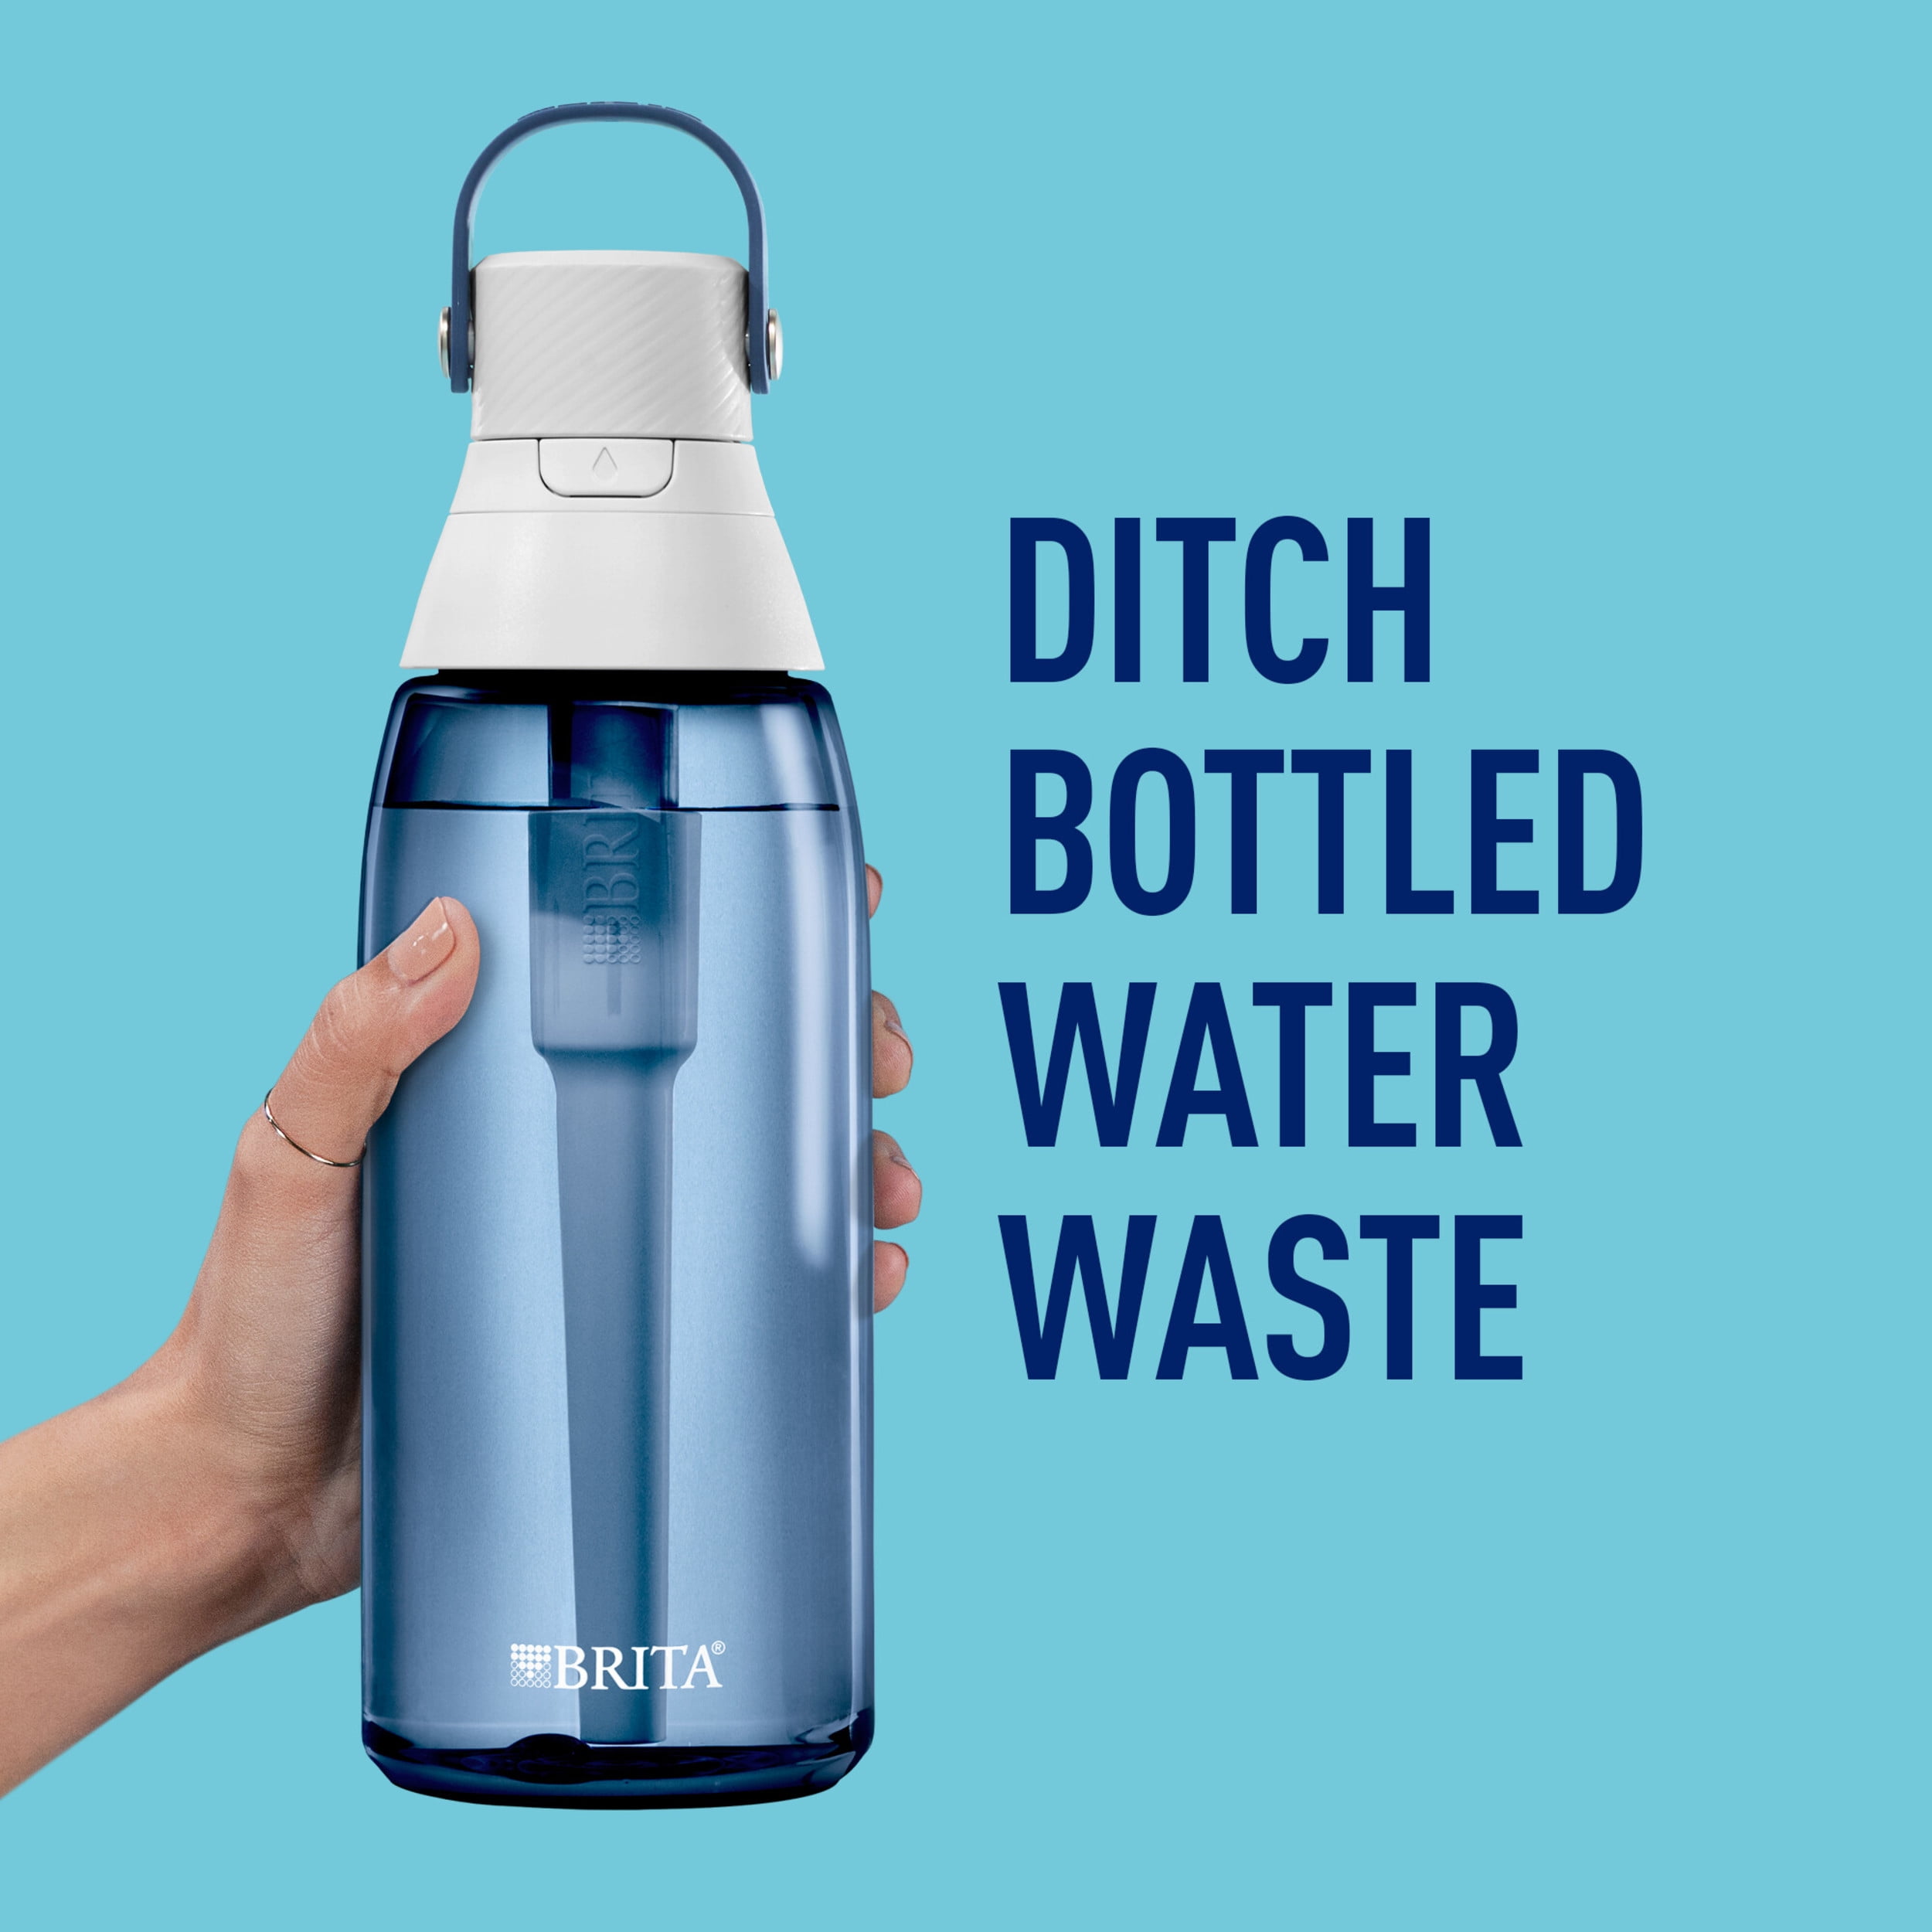 Brita Hard-Sided Plastic Premium Filtering Water Bottle, BPA-Free, Replaces  300 Plastic Water Bottles, Filter Lasts 2 Months or 40 Gallons, Includes 1